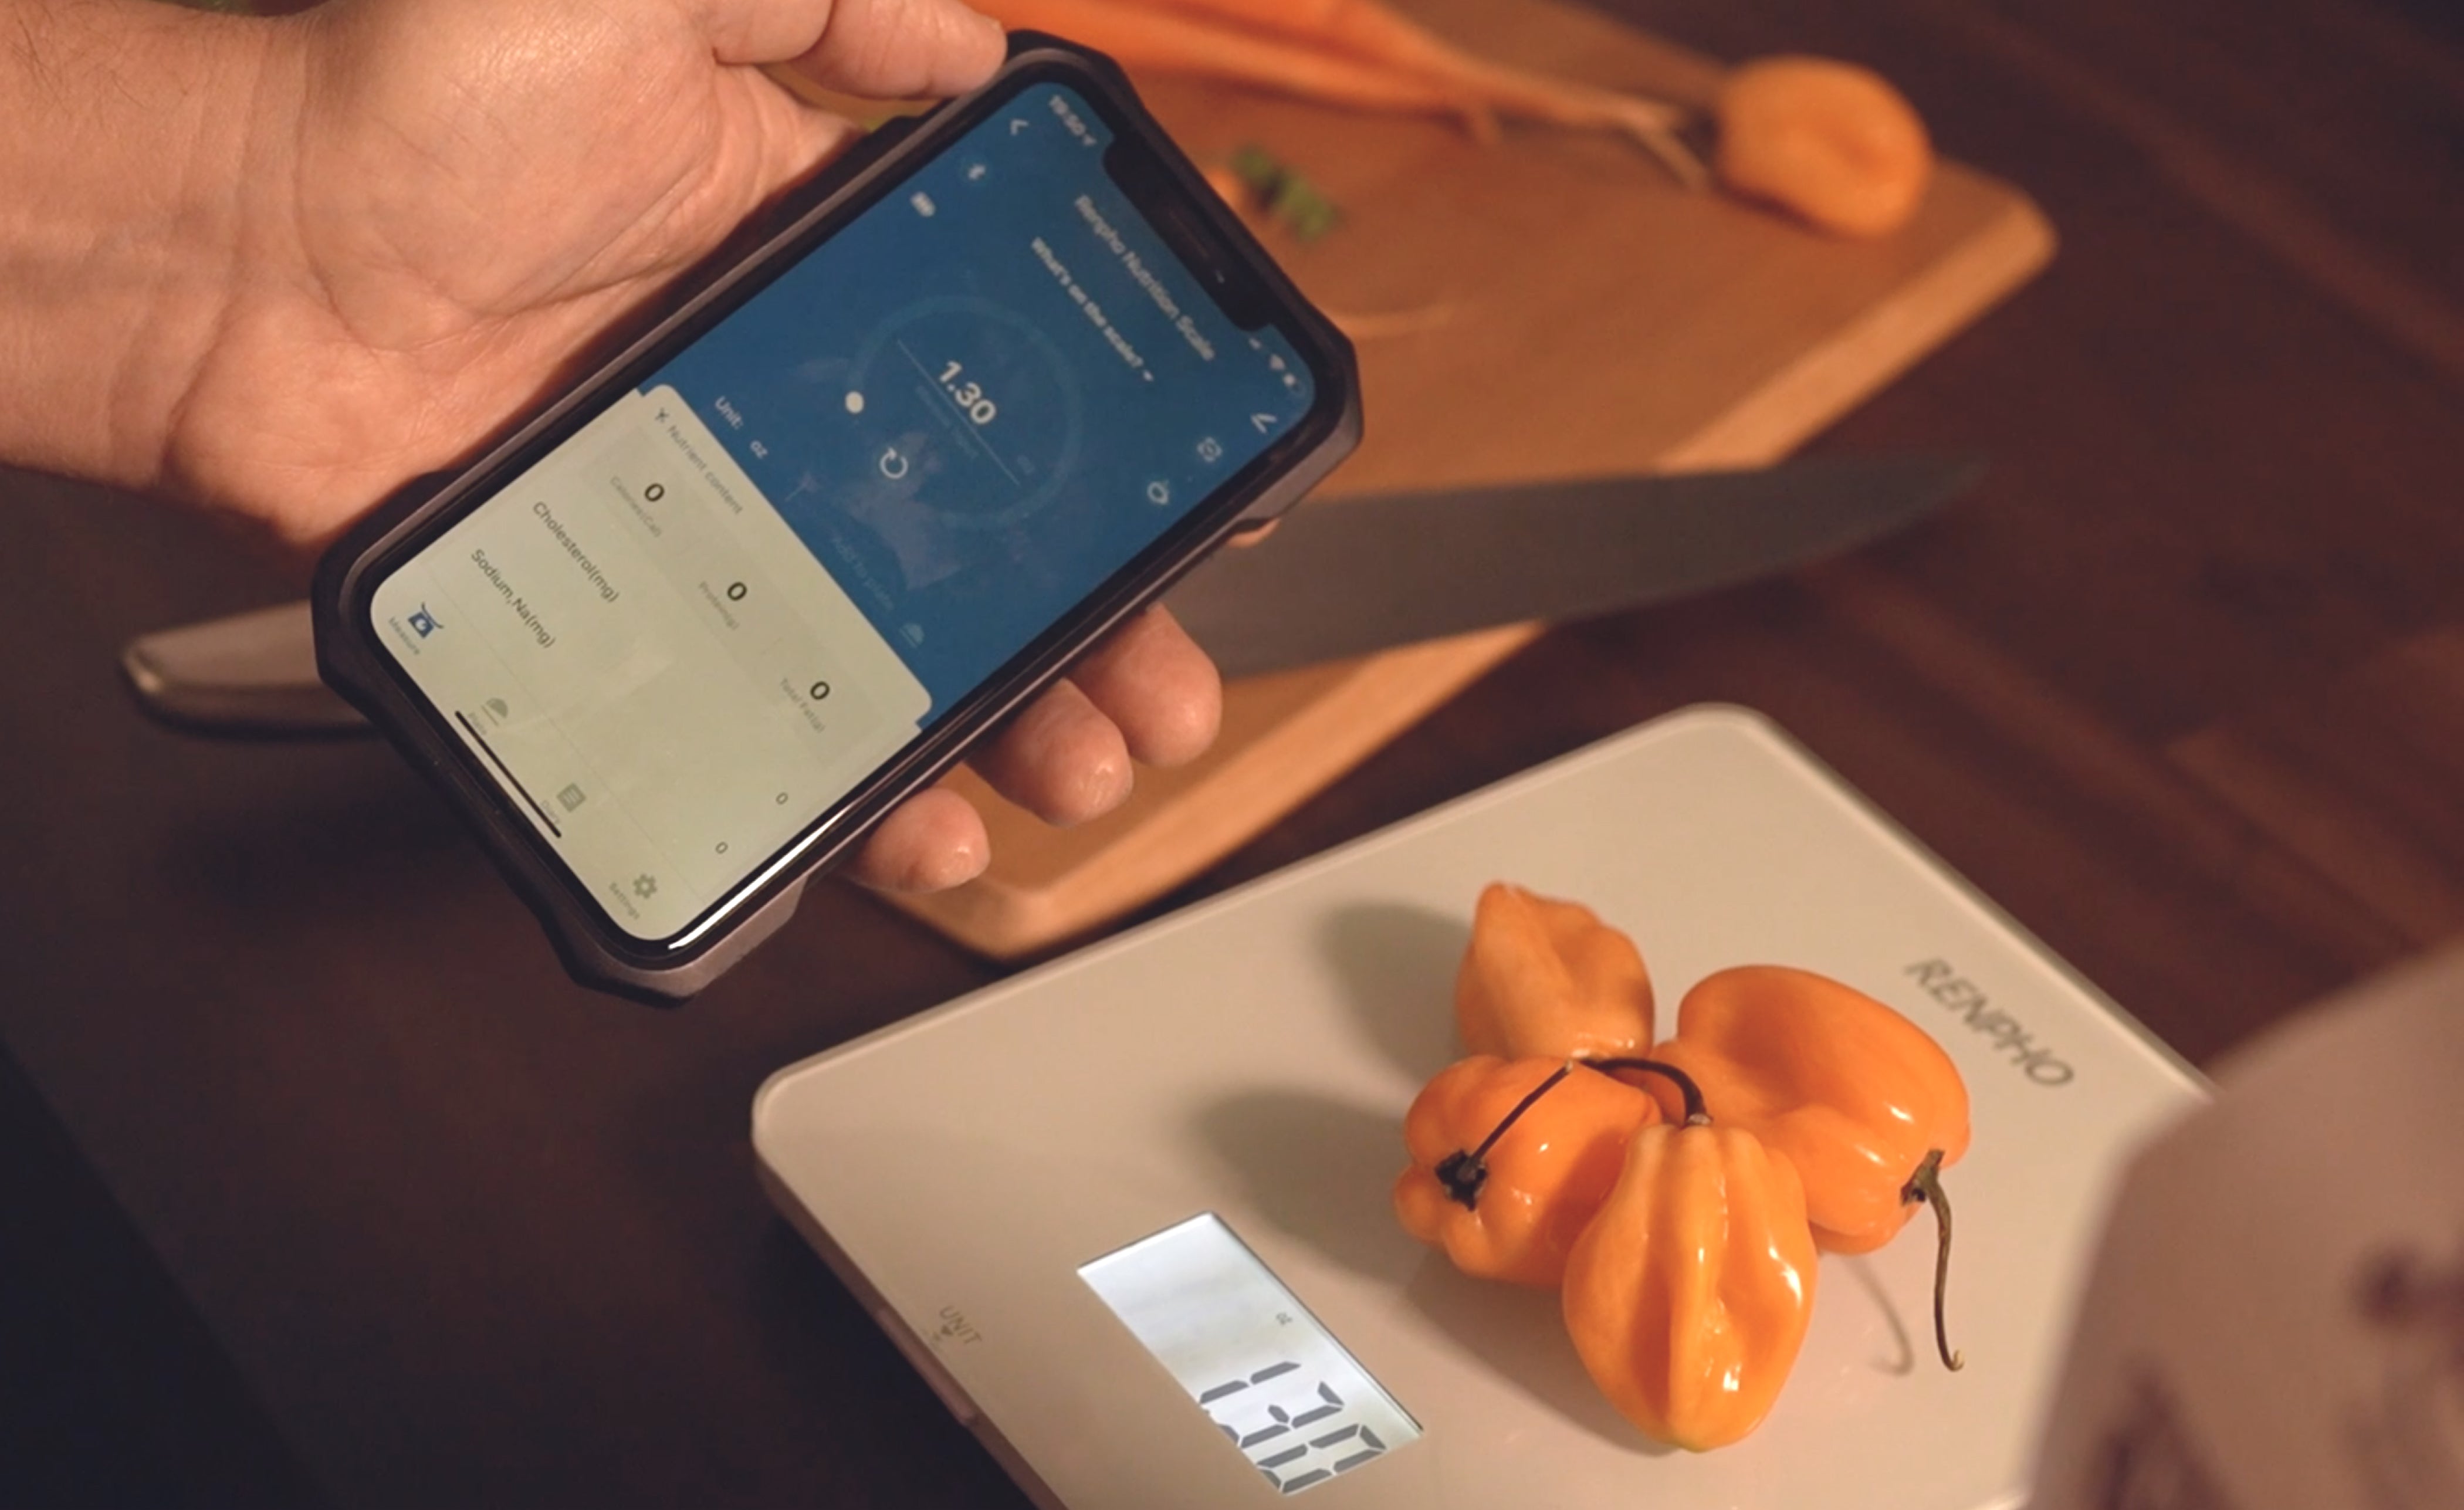 RENPHO digital food scales: How do you use a smart nutrition scale?